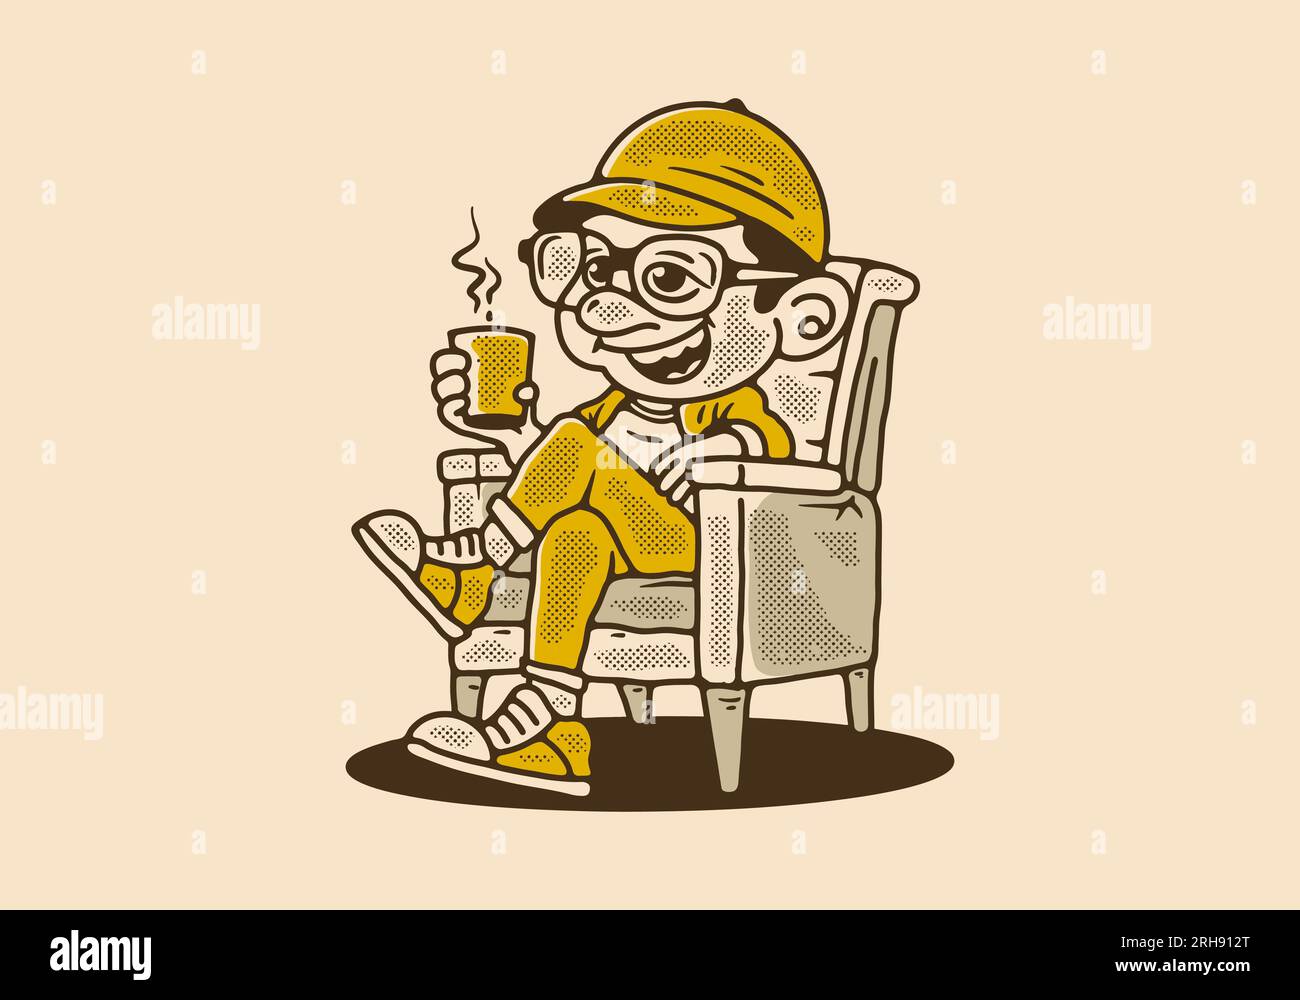 illustration of a man relaxing on a chair and holding a cup of coffee Stock Vector